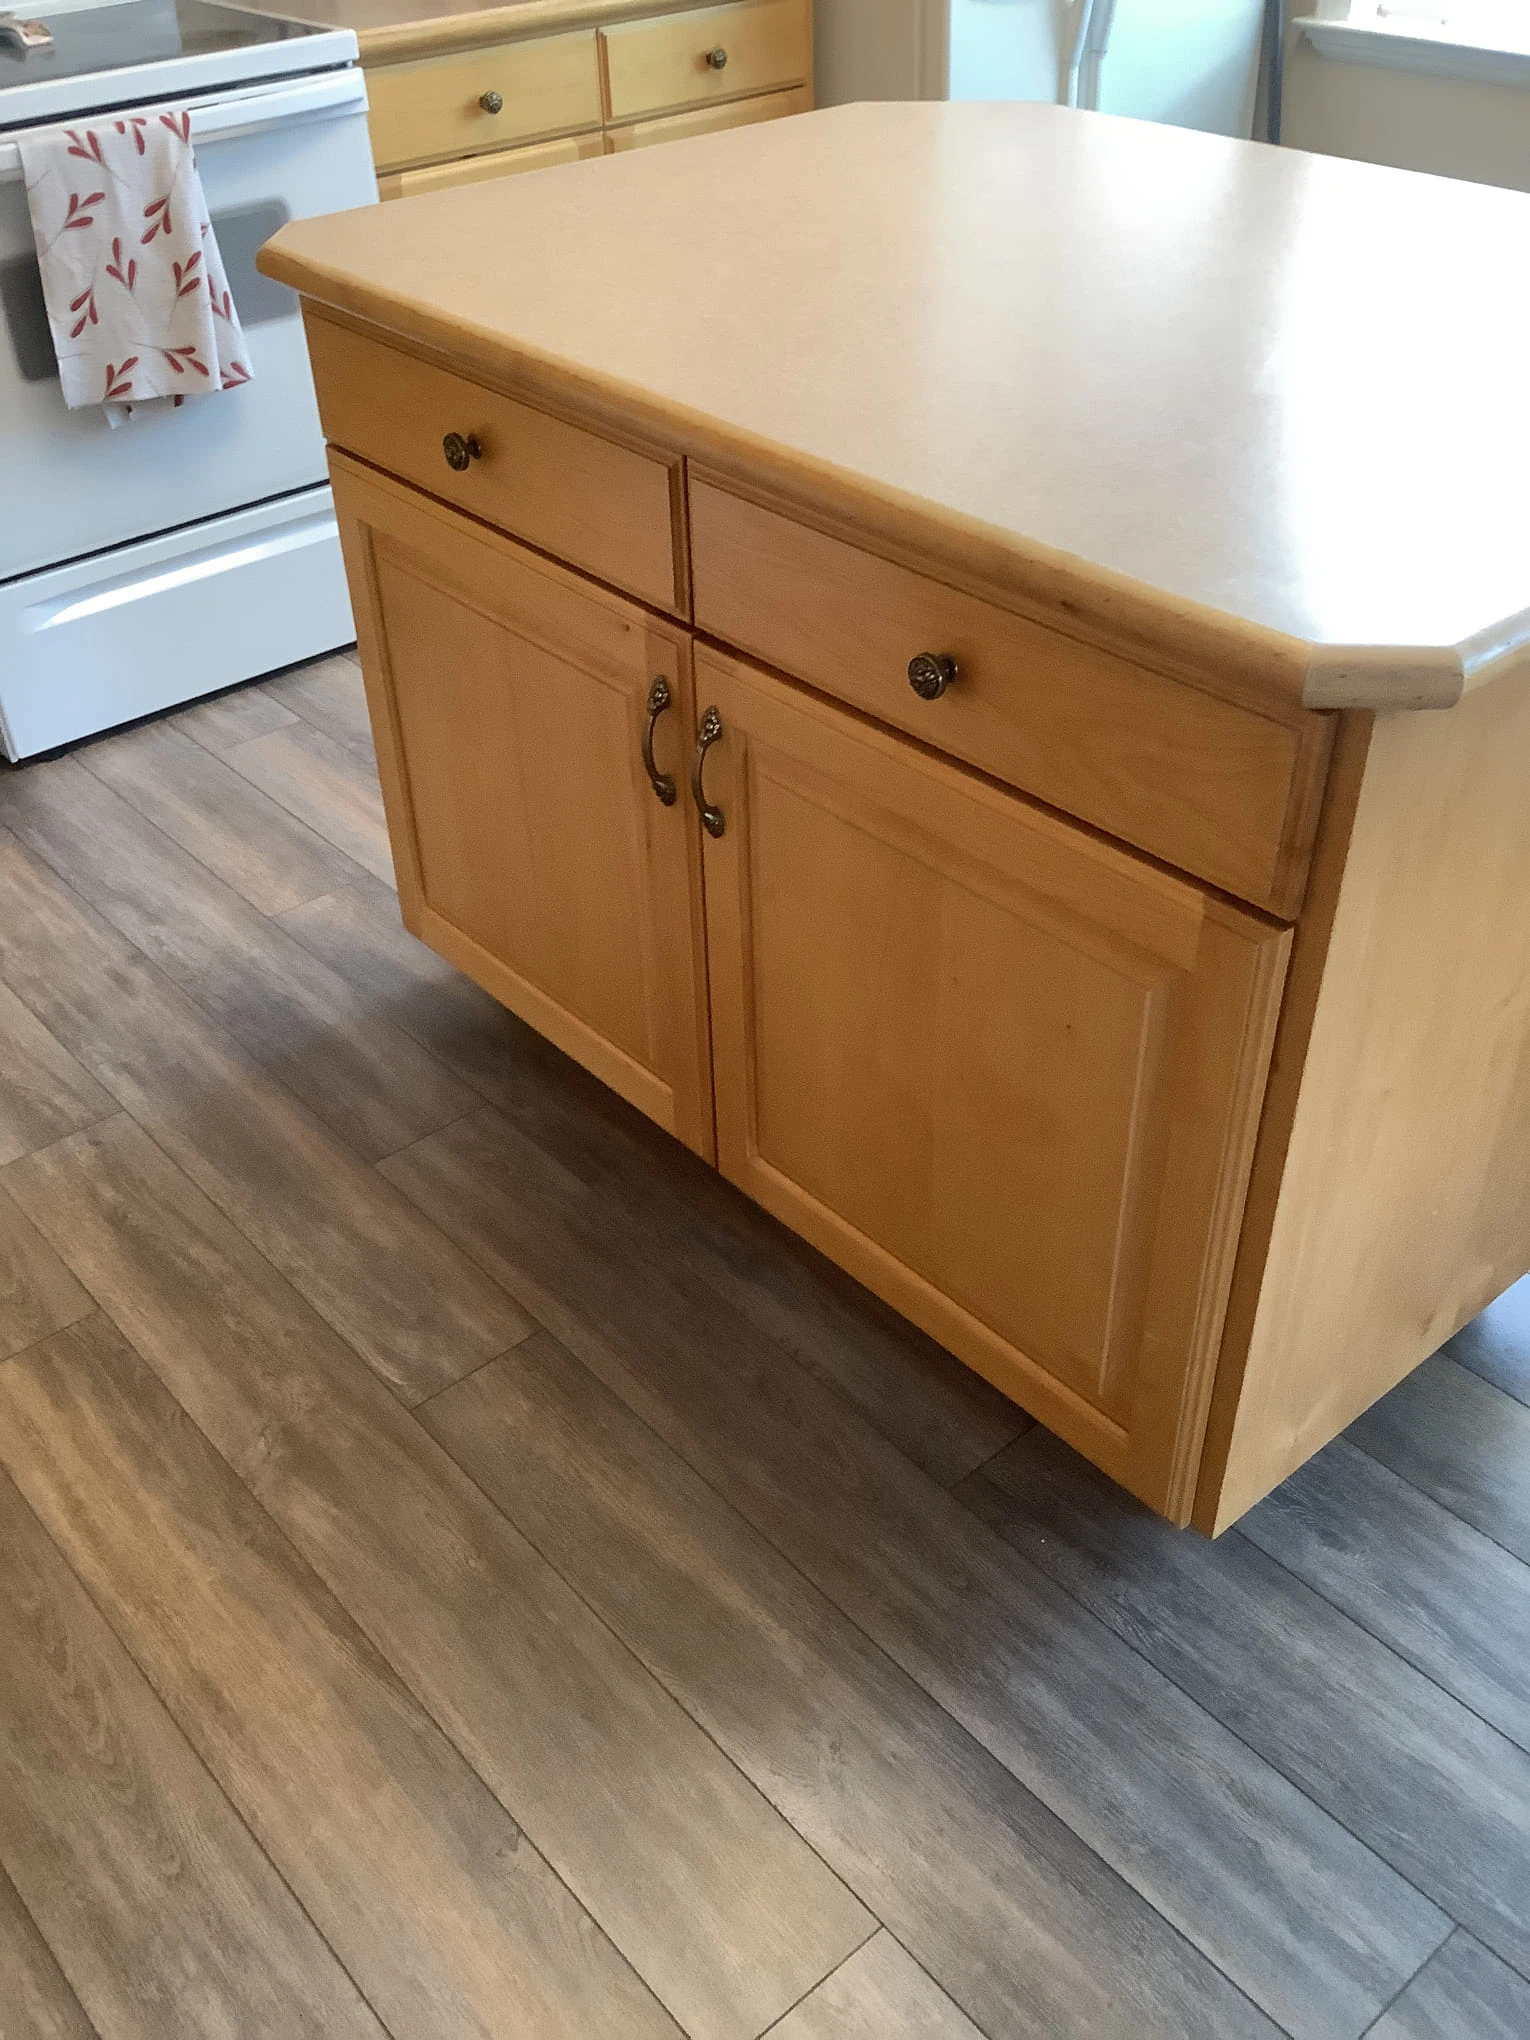 Newly built lower cabinets installed underneath a kitchen island in a home that has recently received professional service for finish carpentry in Lehi, UT.